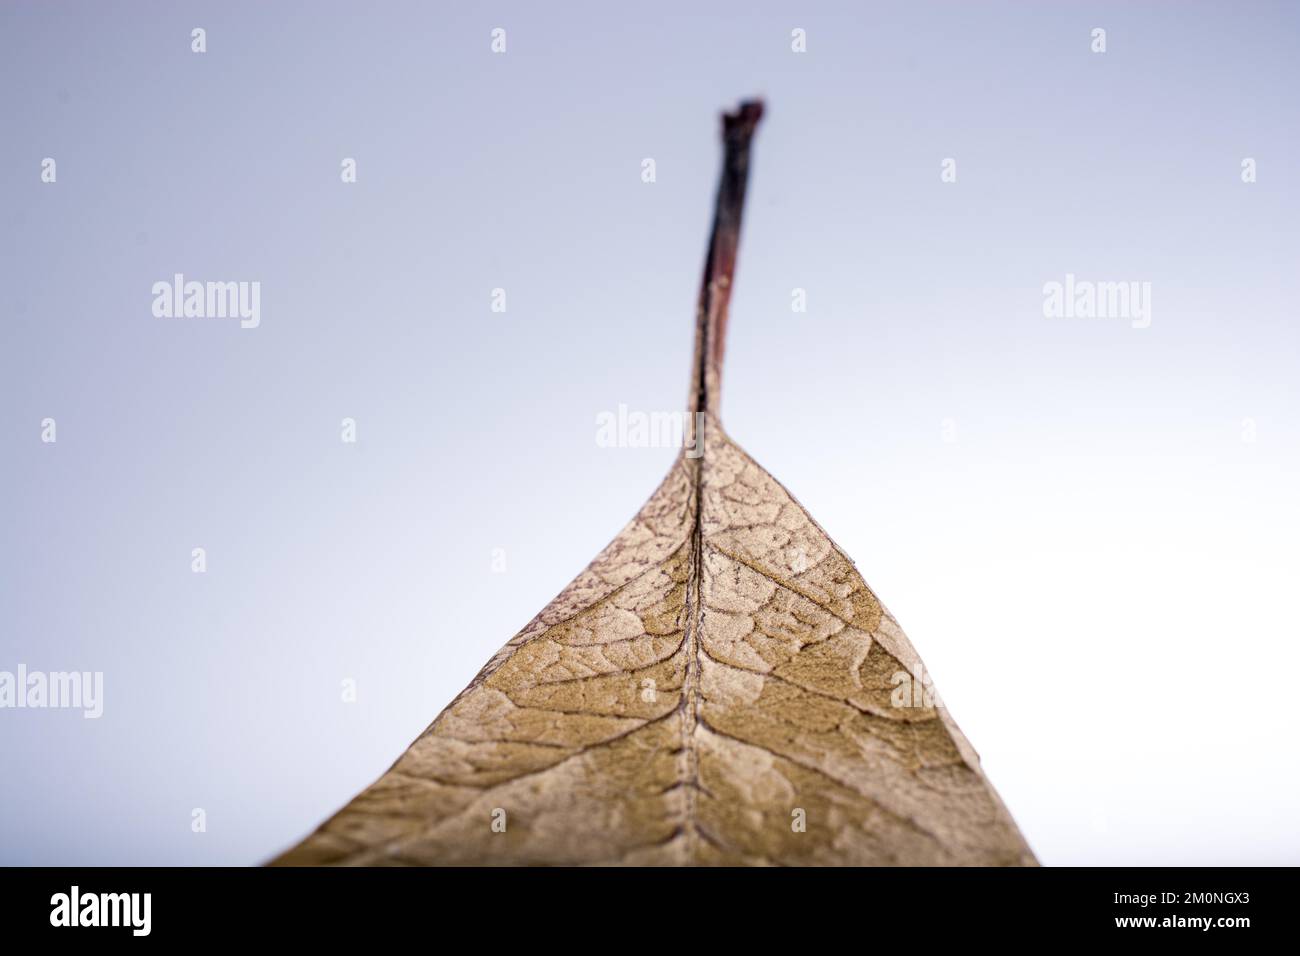 Dry leaf on a grey background Stock Photo